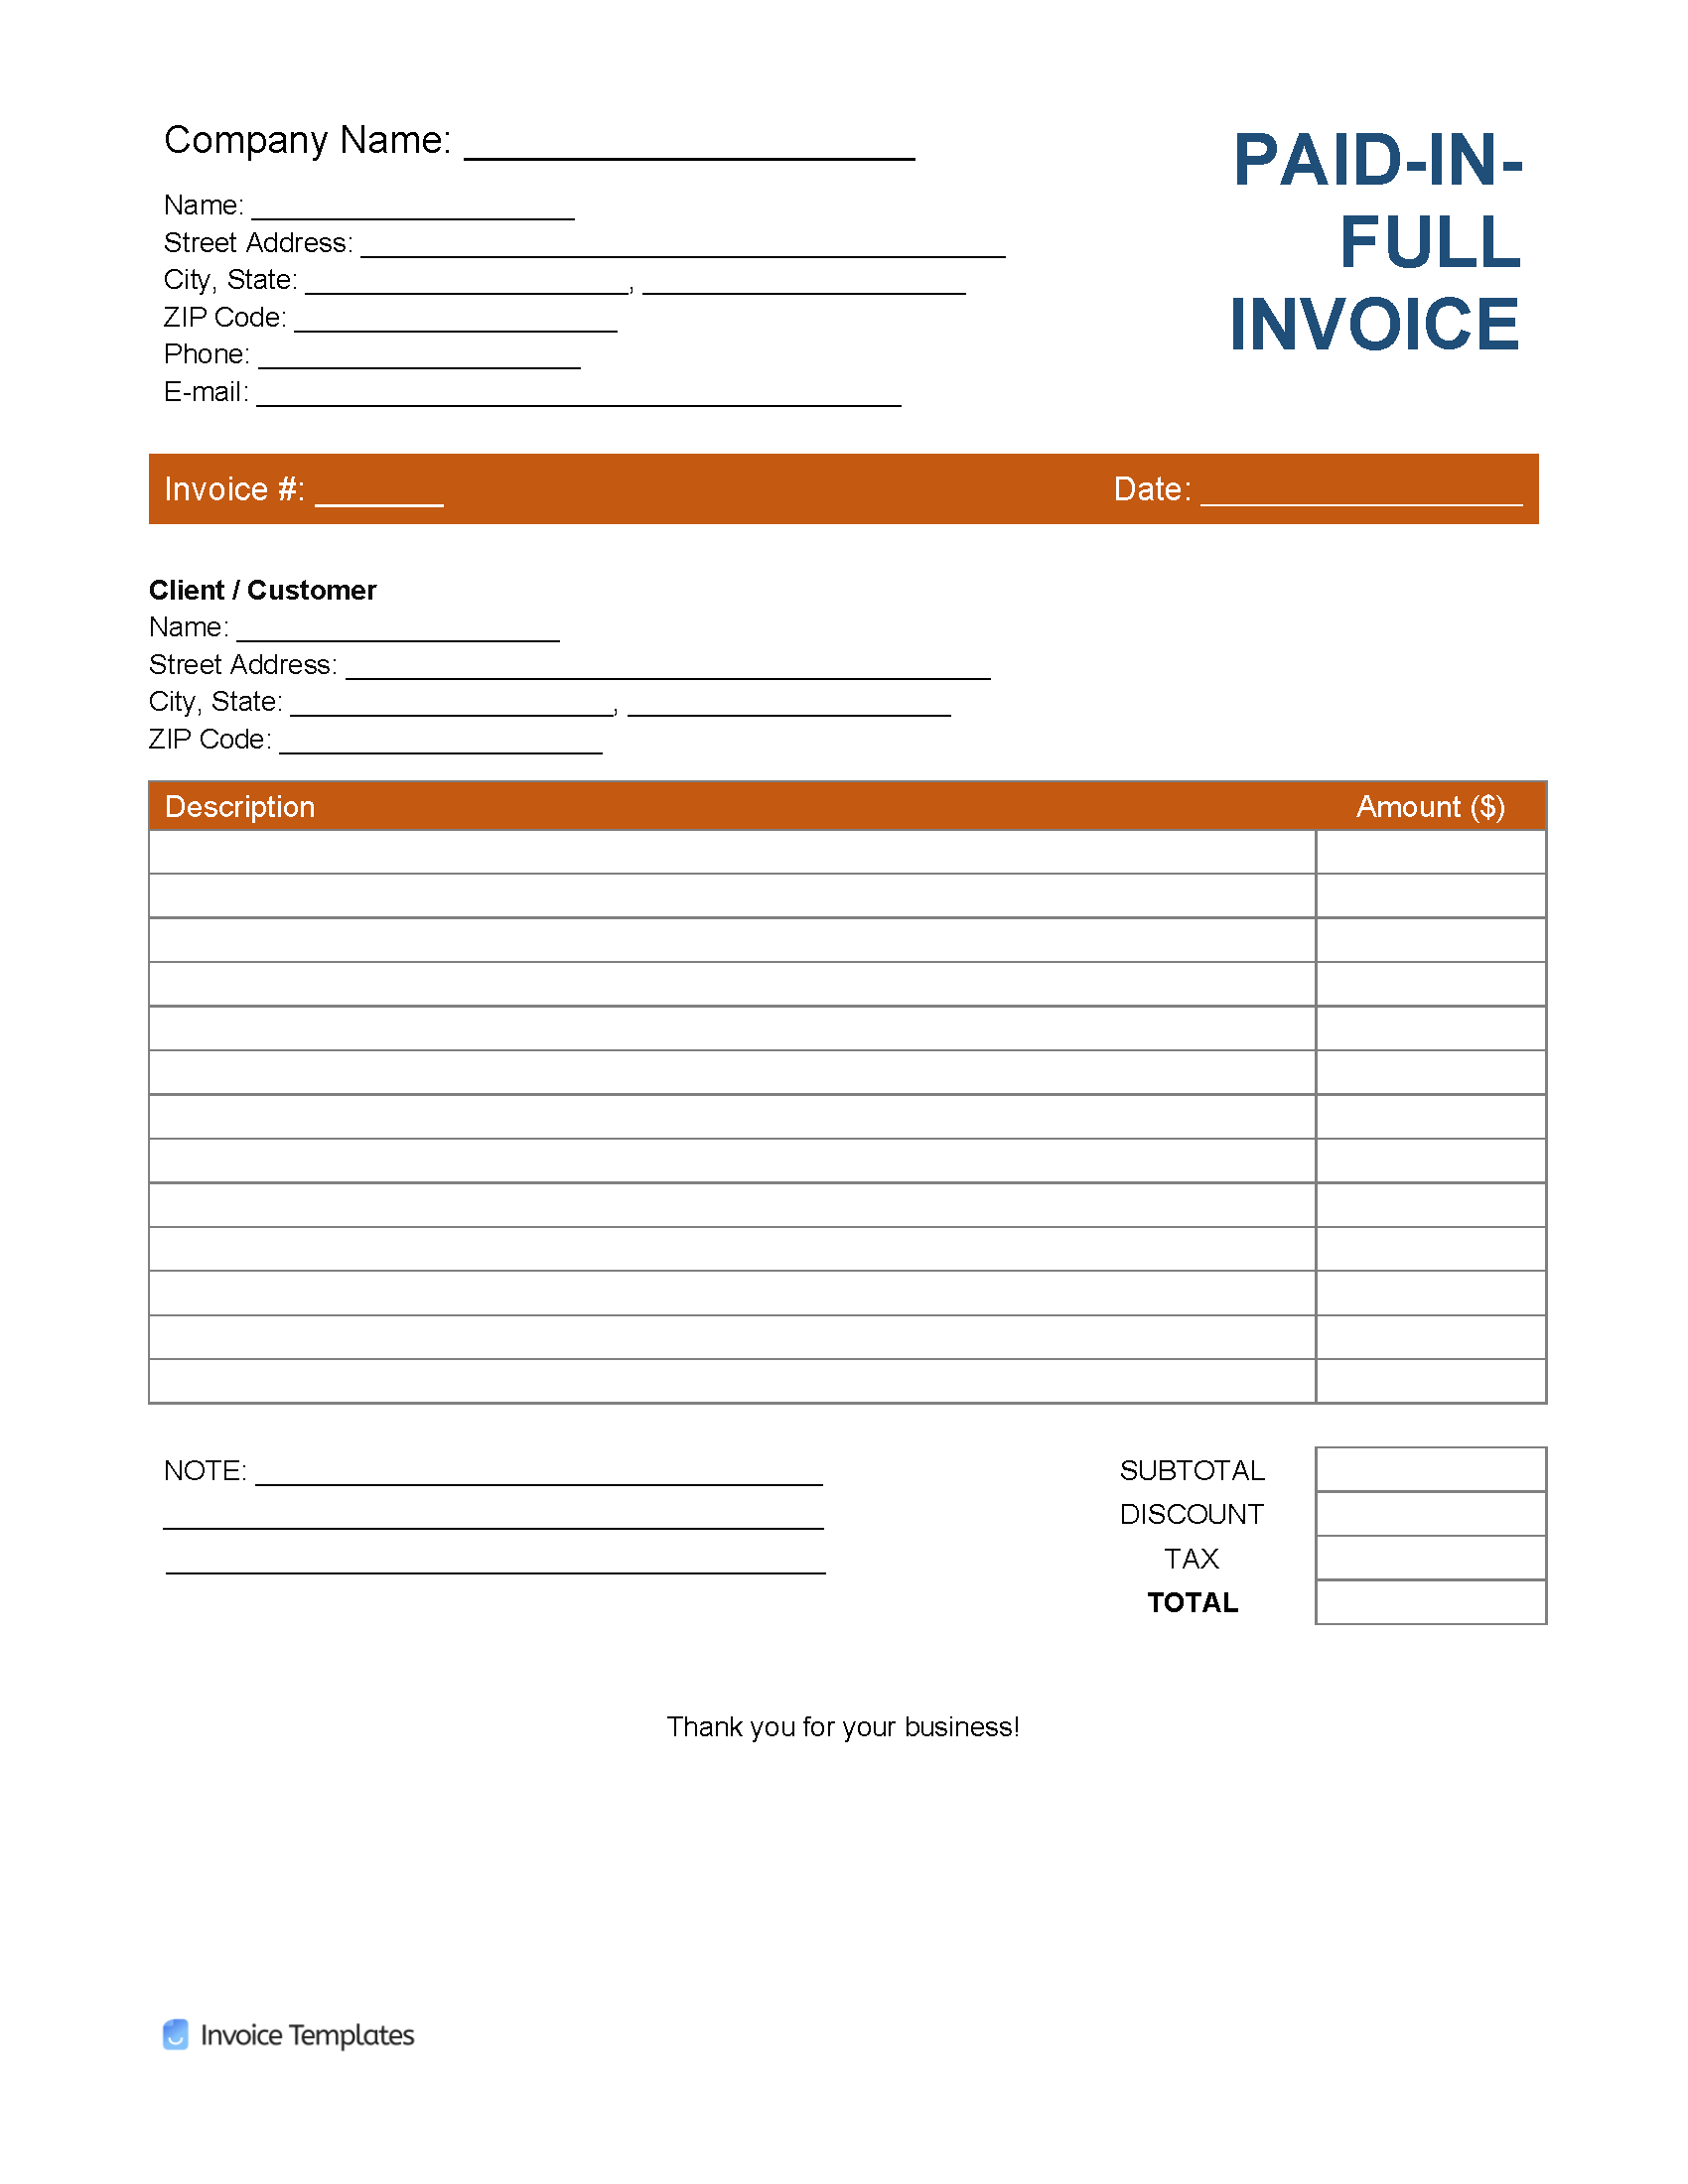 Free Paid (in-full) Invoice Template  PDF  WORD  EXCEL Throughout Itemized Invoice Template